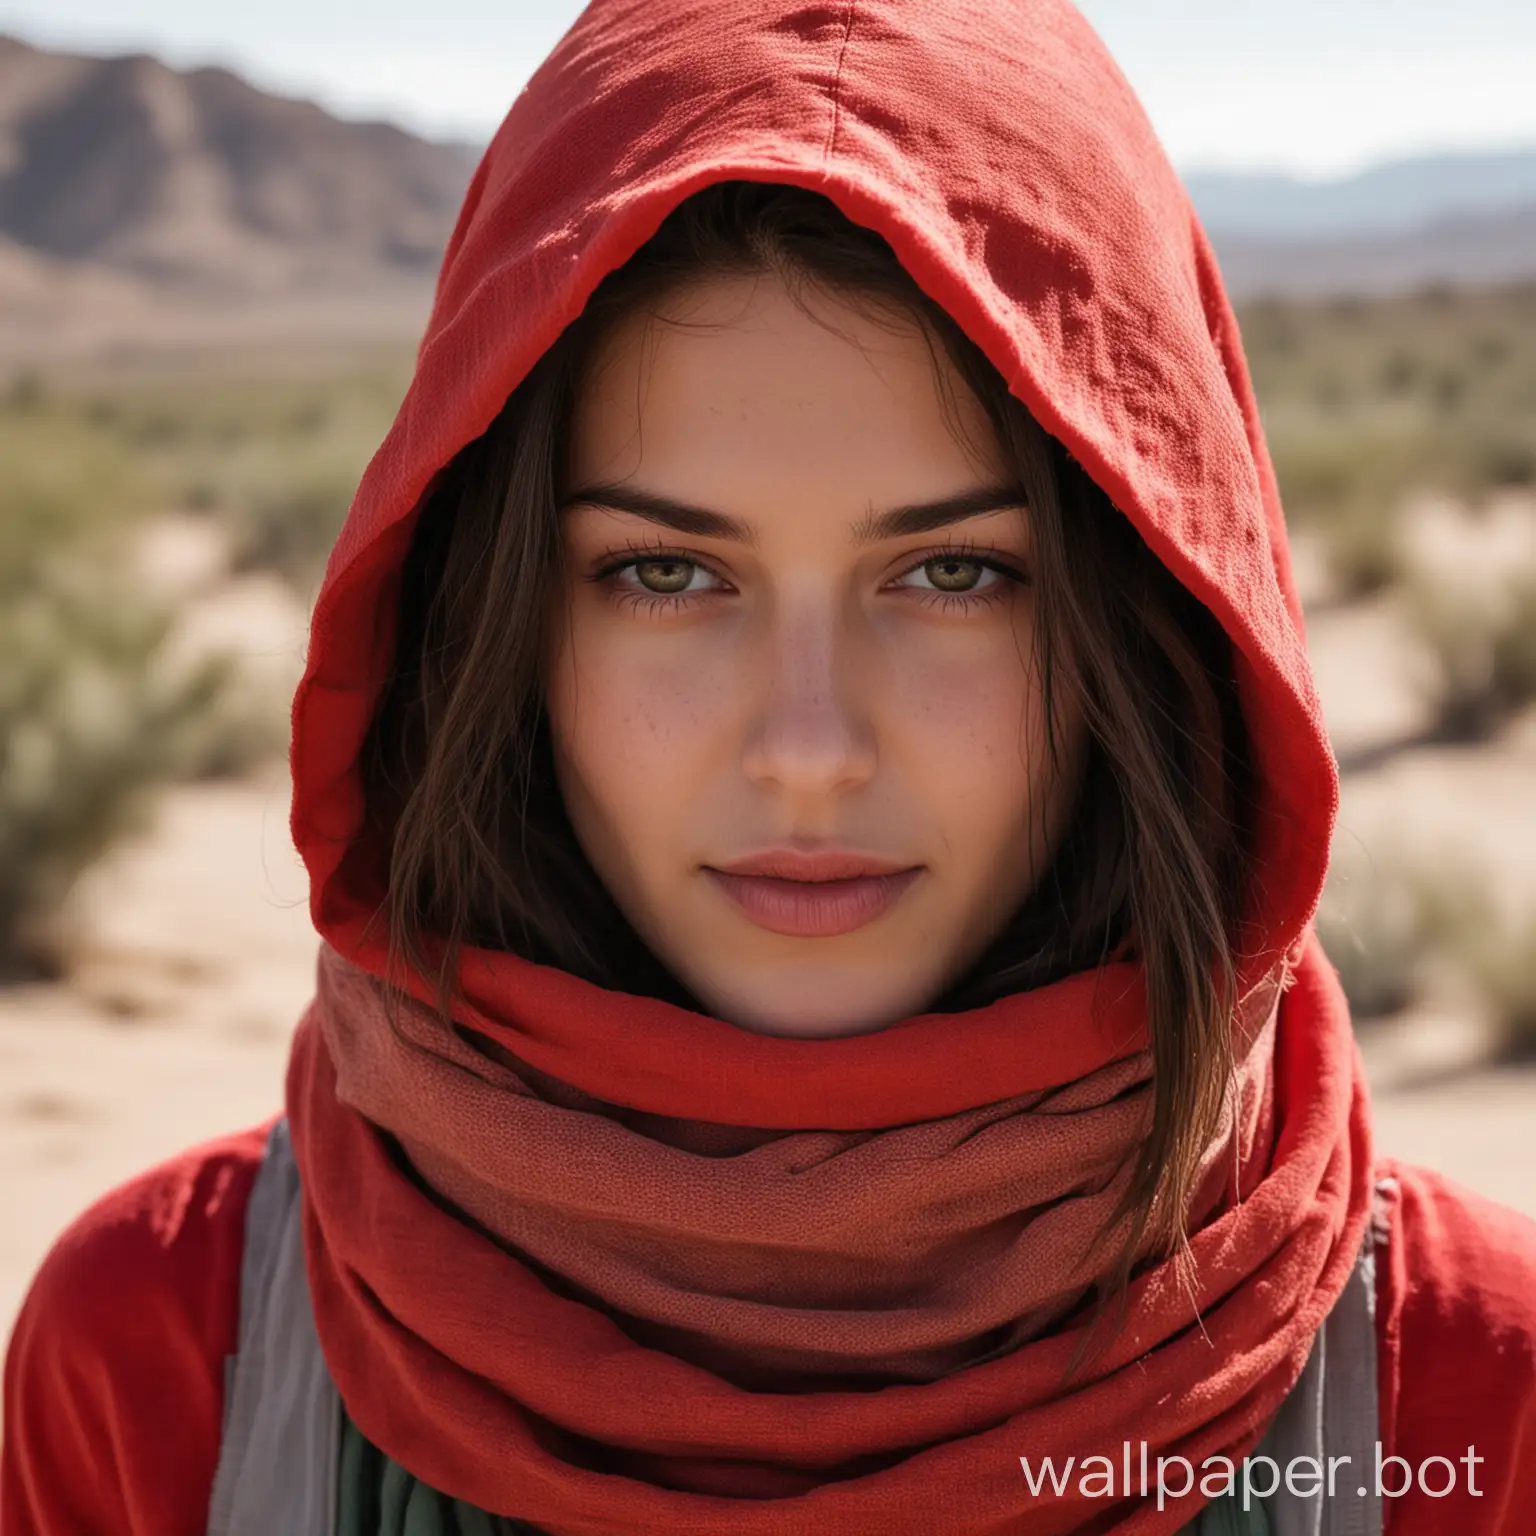 Faded green scarf covering the face of a brunette girl wearing a worn weather red  hood in the desert . frontal view close up